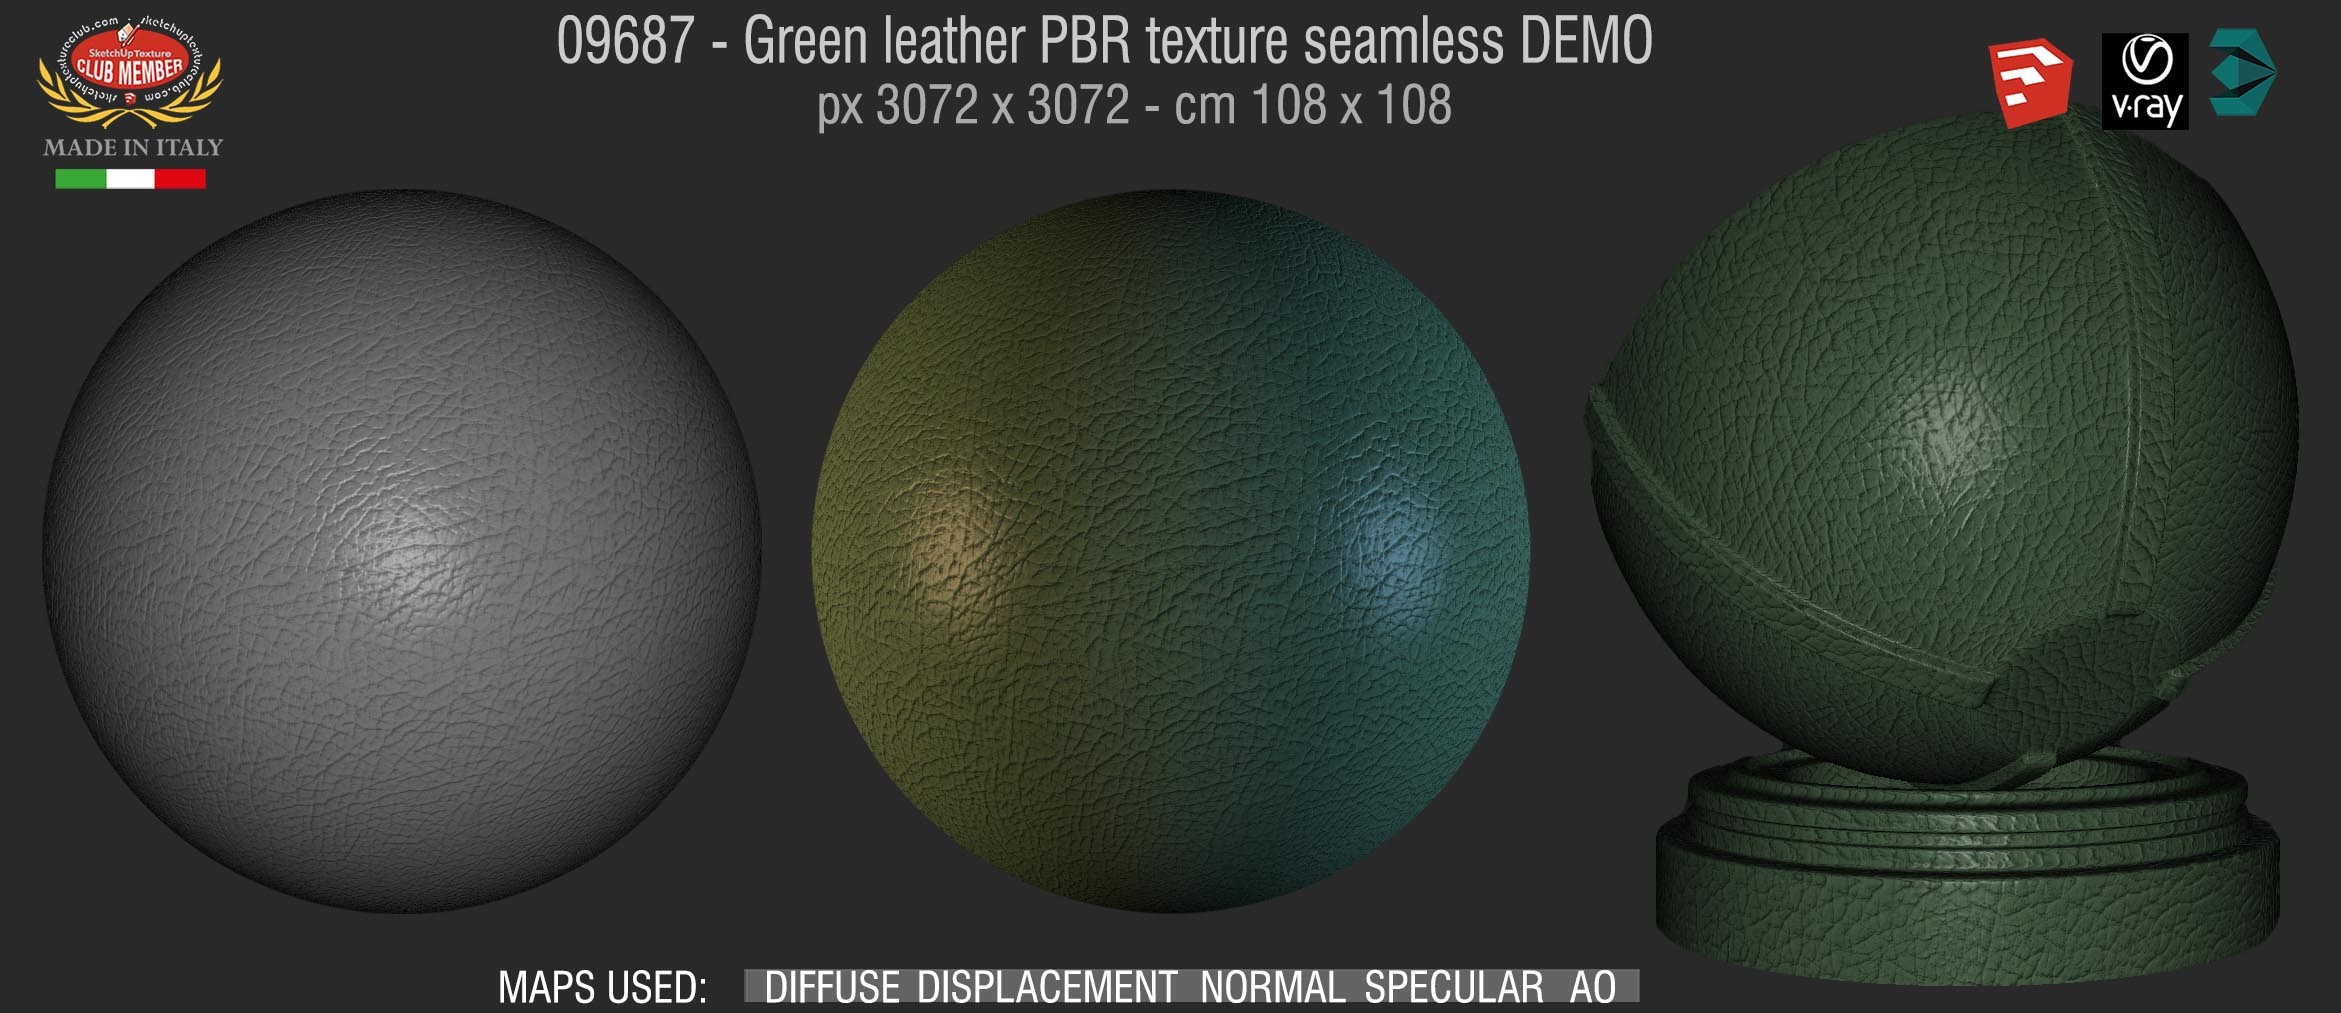 09687 Green leather PBR texture seamless DEMO